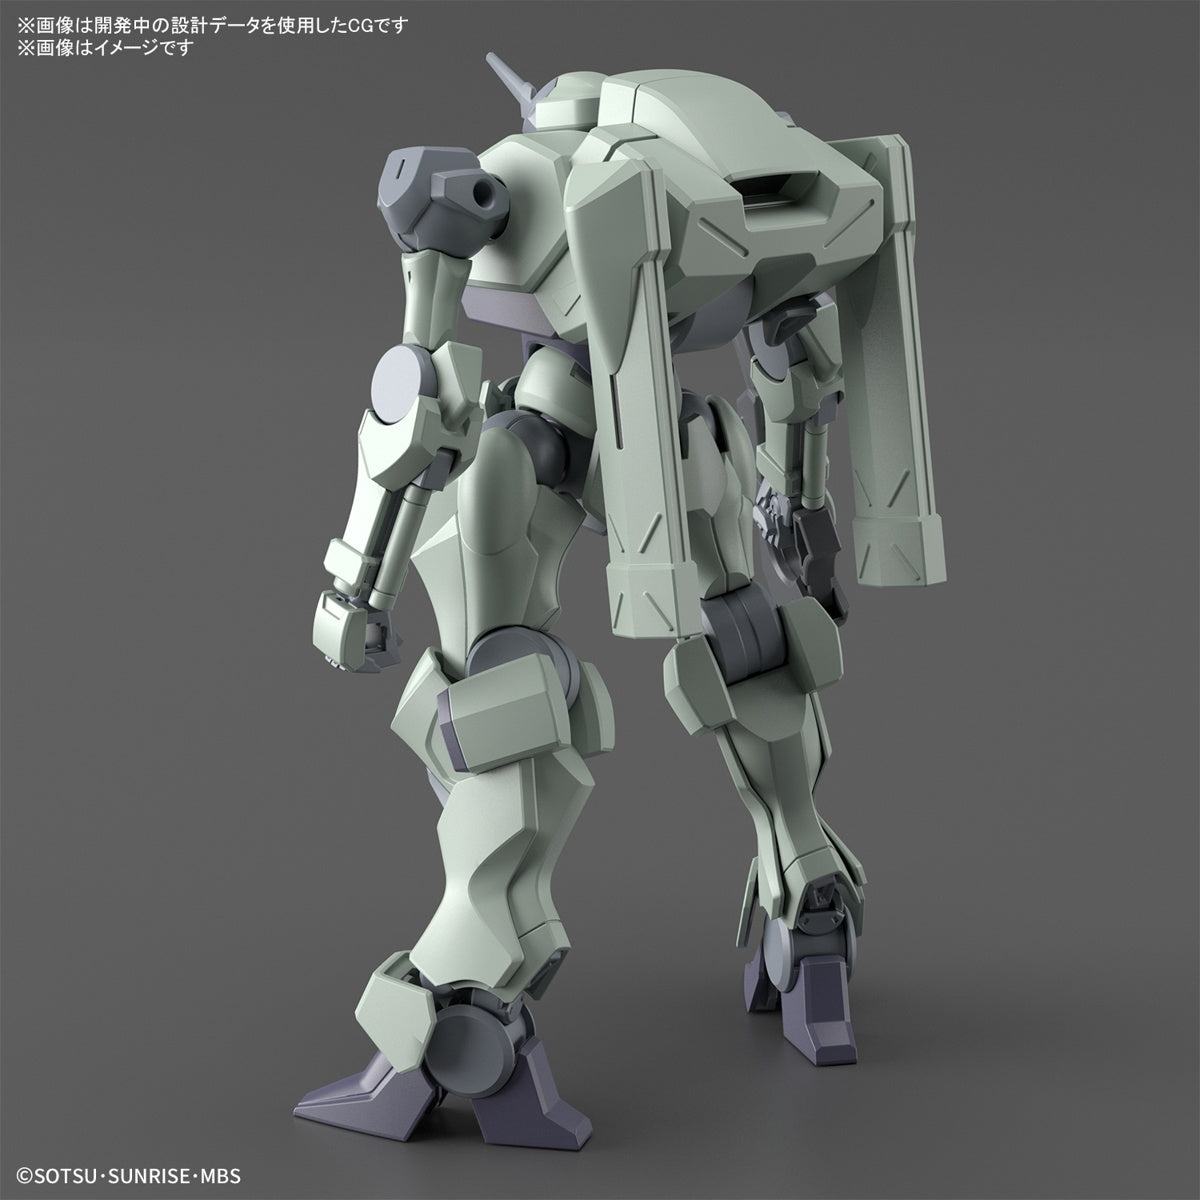 [PREORDER] HG 1/144 Zowort